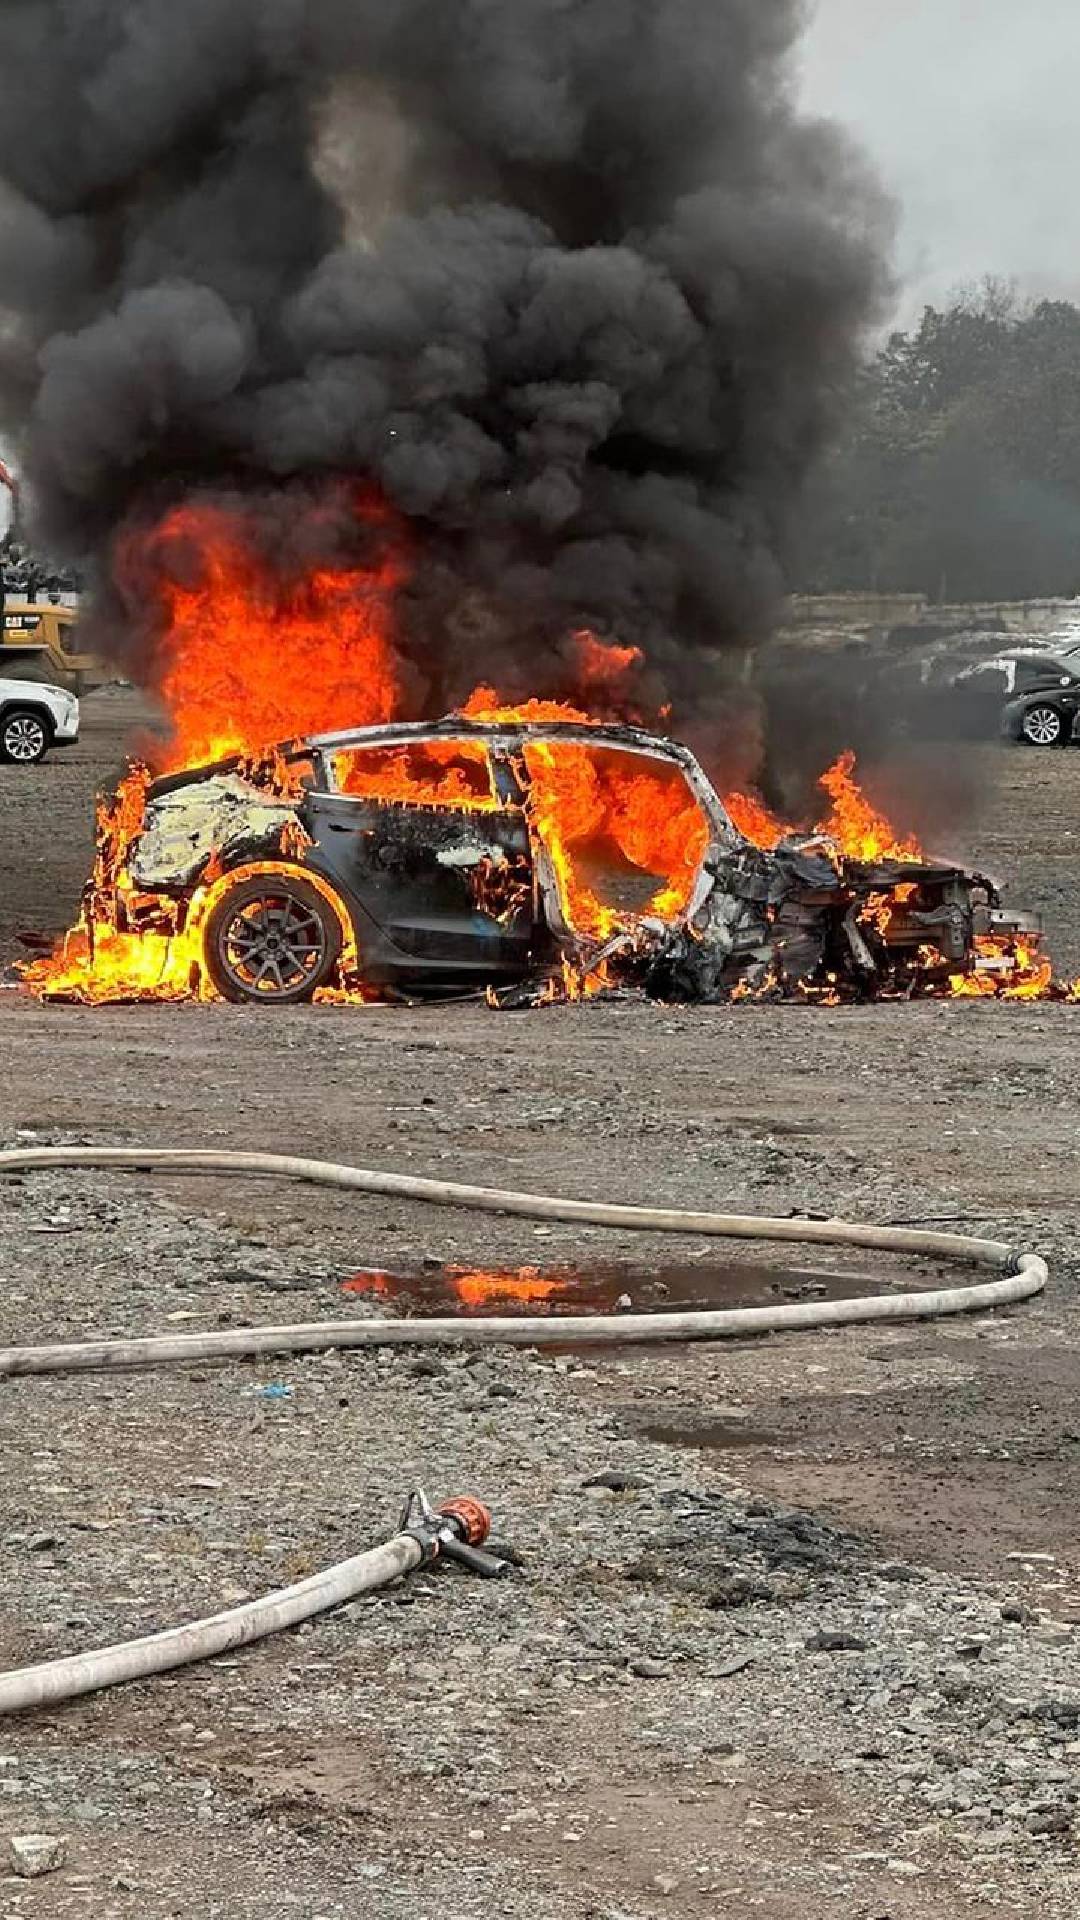 Why car catches fire? Top reasons you should know